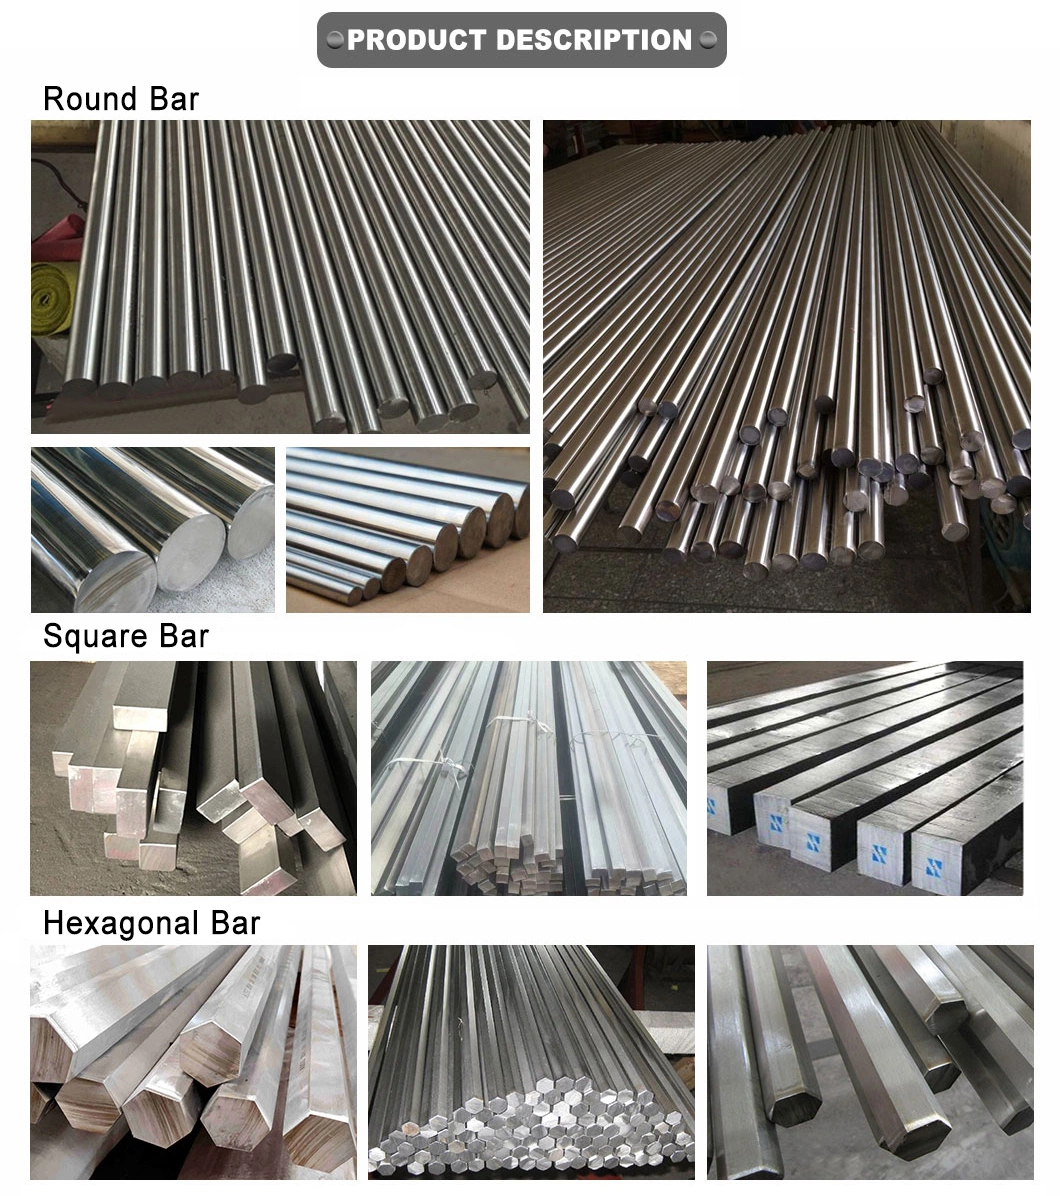 AISI 1080 Steel Rod 3mm 4mm 5mm 8mm 304 Round Ground Polished Rod Bar Stainless Steel Bar